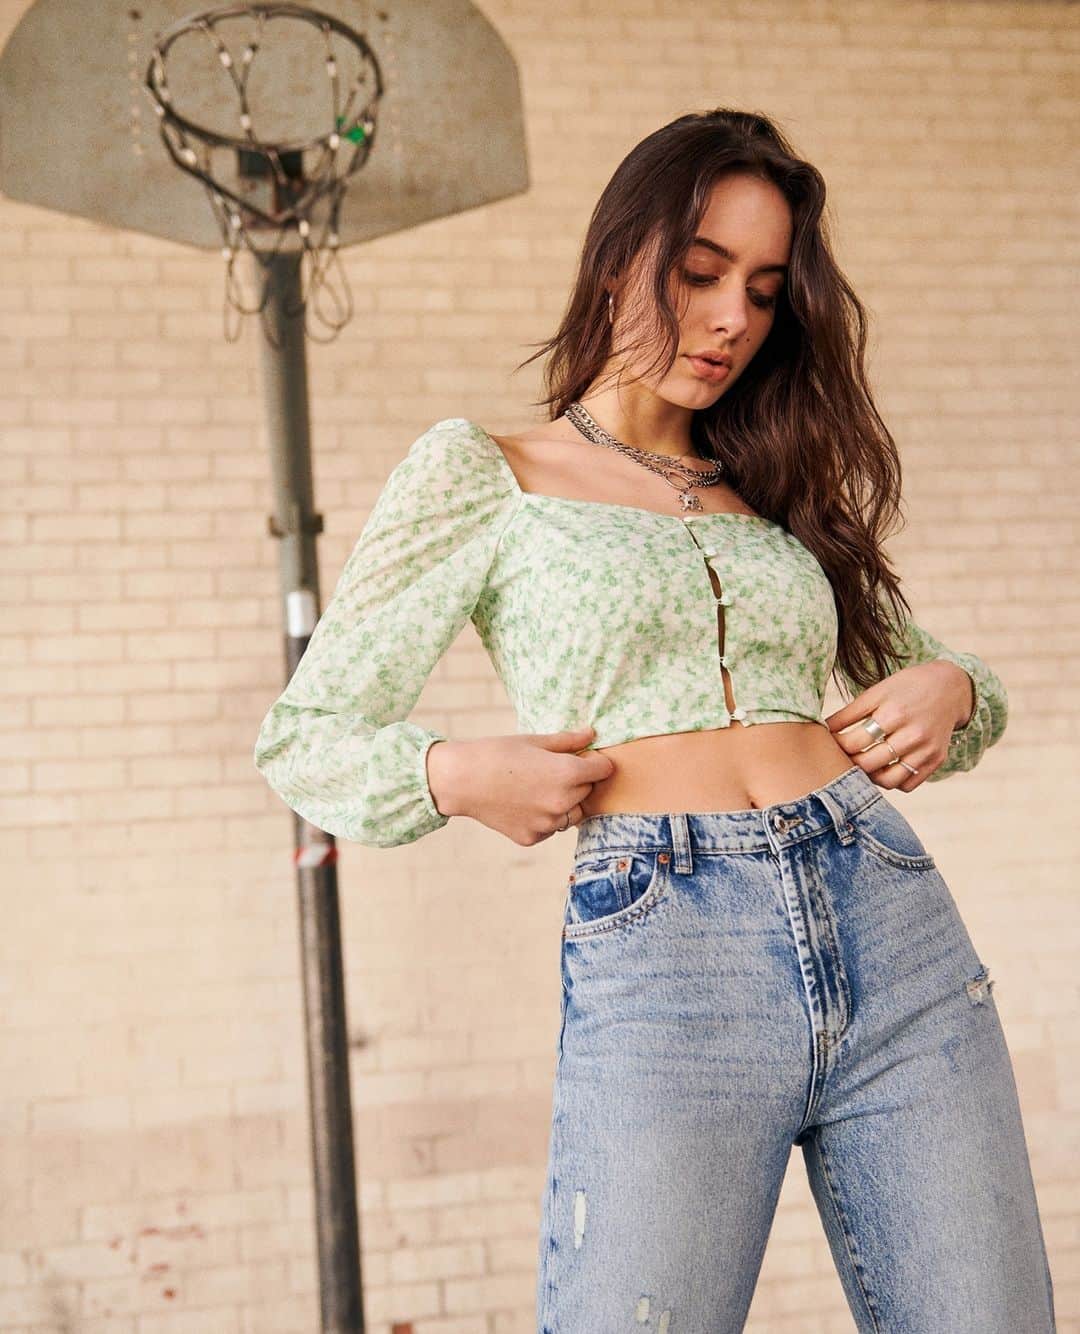 TALLY WEiJLのインスタグラム：「Matcha, please 💚⁠ ⁠ Babe Kayla @kayla_shyx serving major outfit inspo wearing the Green Printed Blouse🔎 SWSPEKREMA from our Matcha Collection. Discover the full edit on www.tally-weijl.com right now ✨⁠ ⁠ #TALLYWEiJL #newin #newarrivals #fashion」